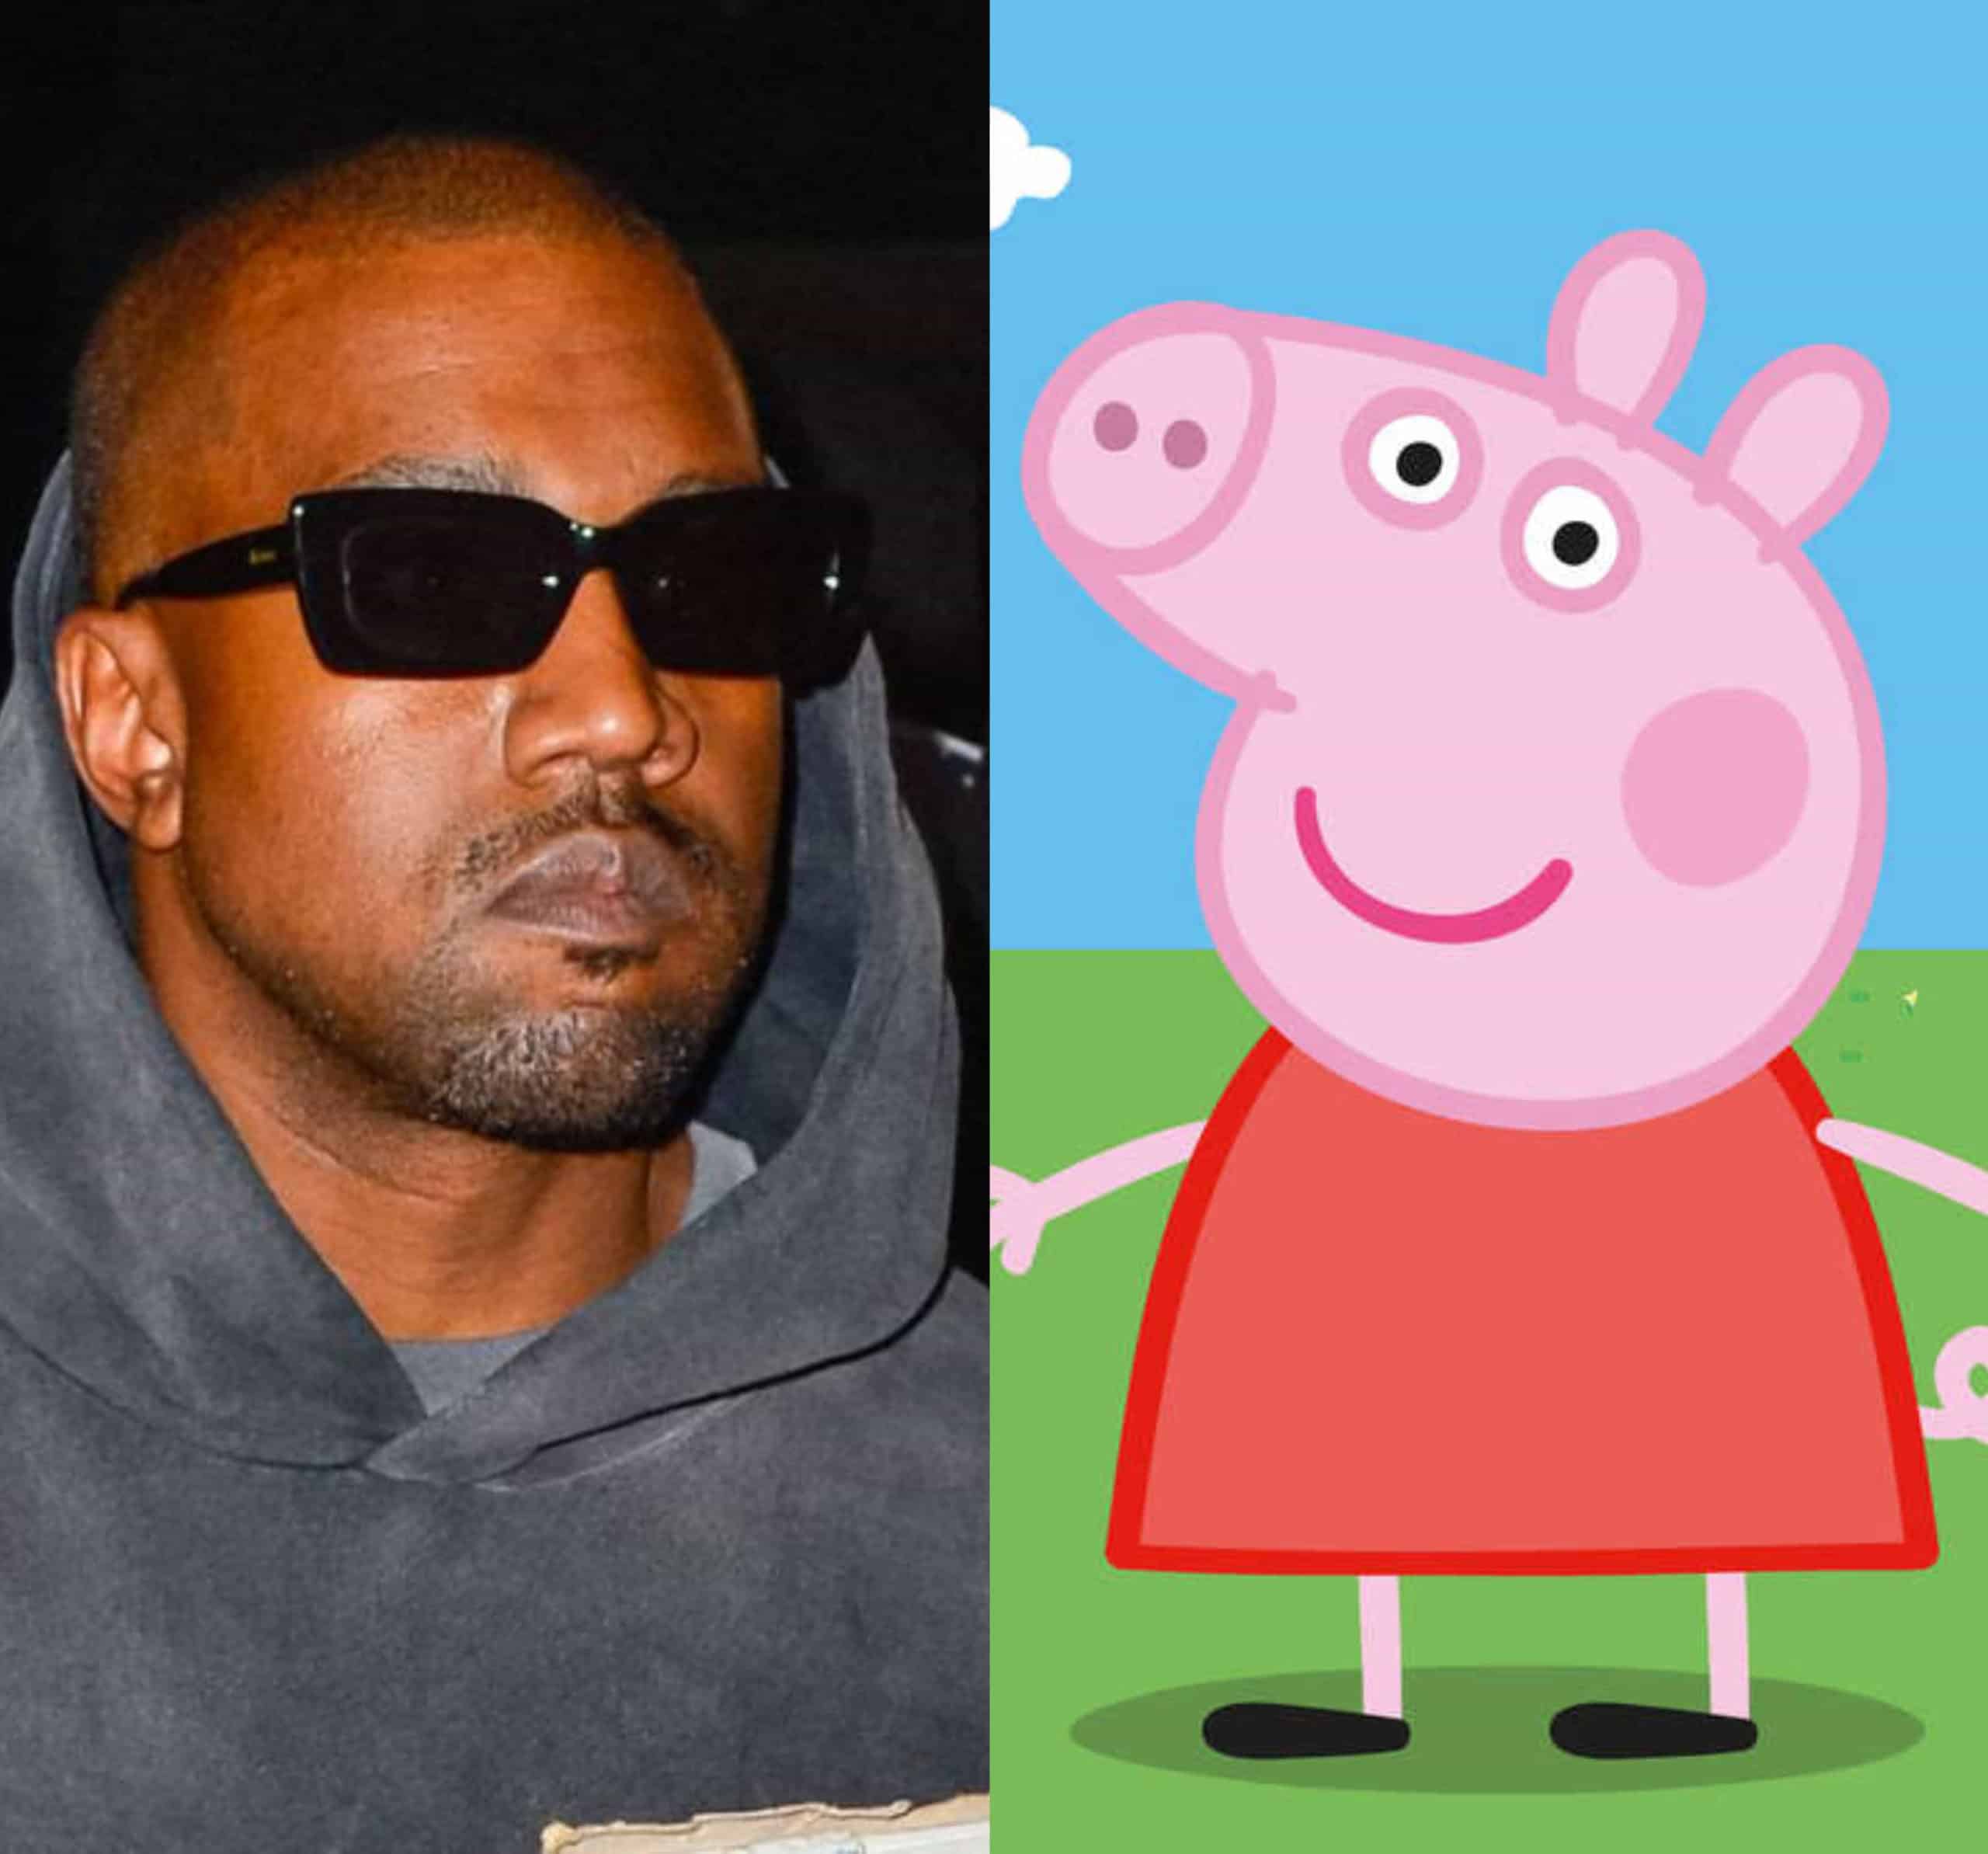 Kanye West Trends For His Beef With Cartoon Peppa Pig